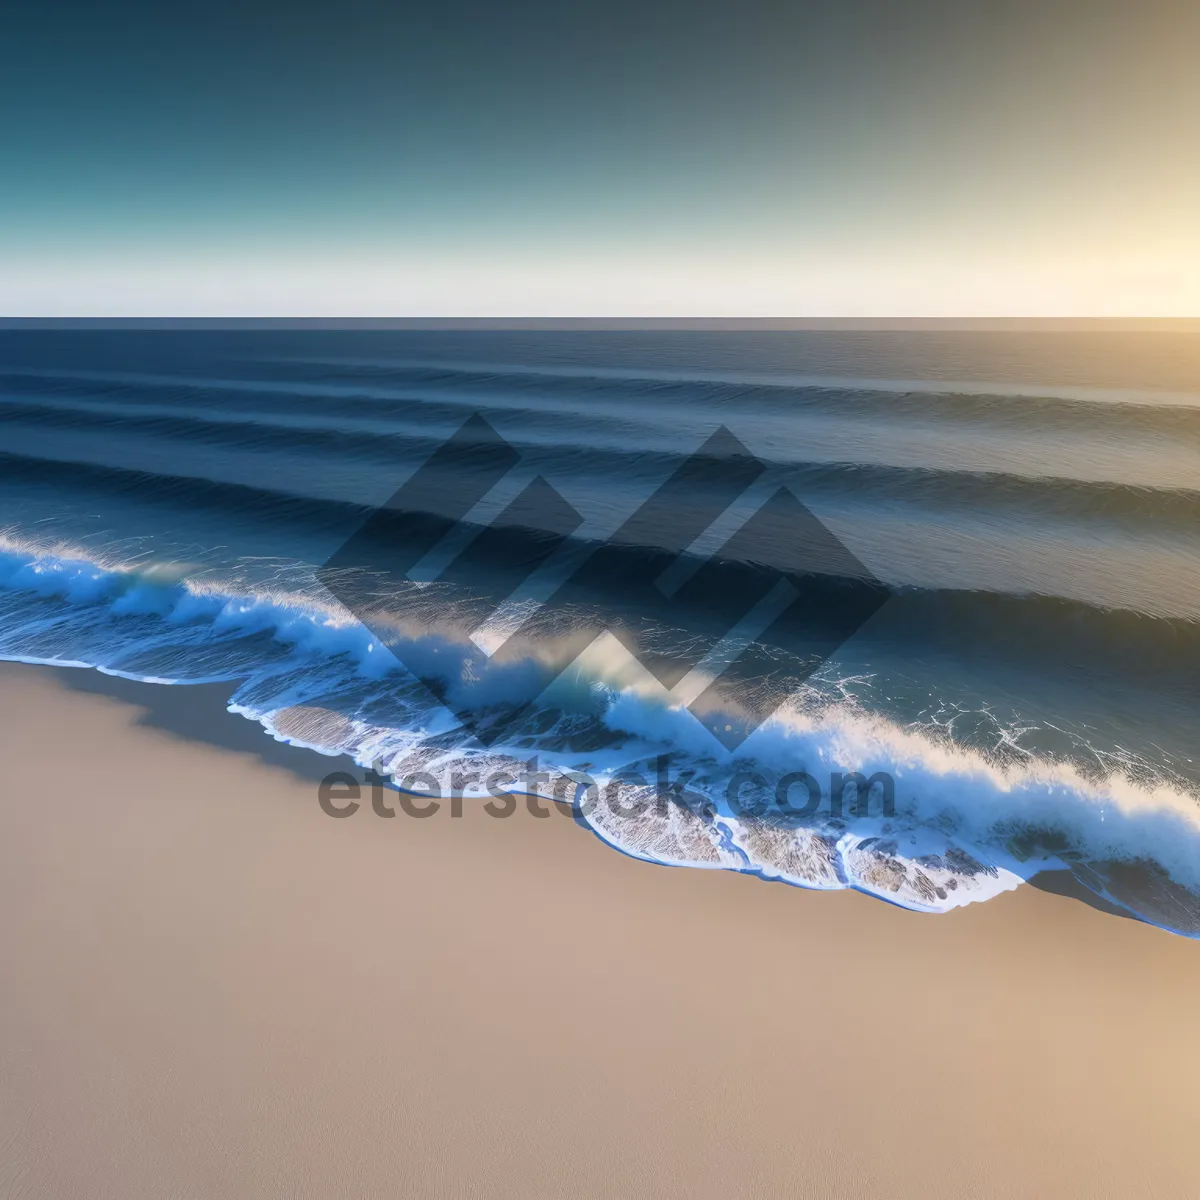 Picture of Crystal Blue Waves Caressing Sandy Beach